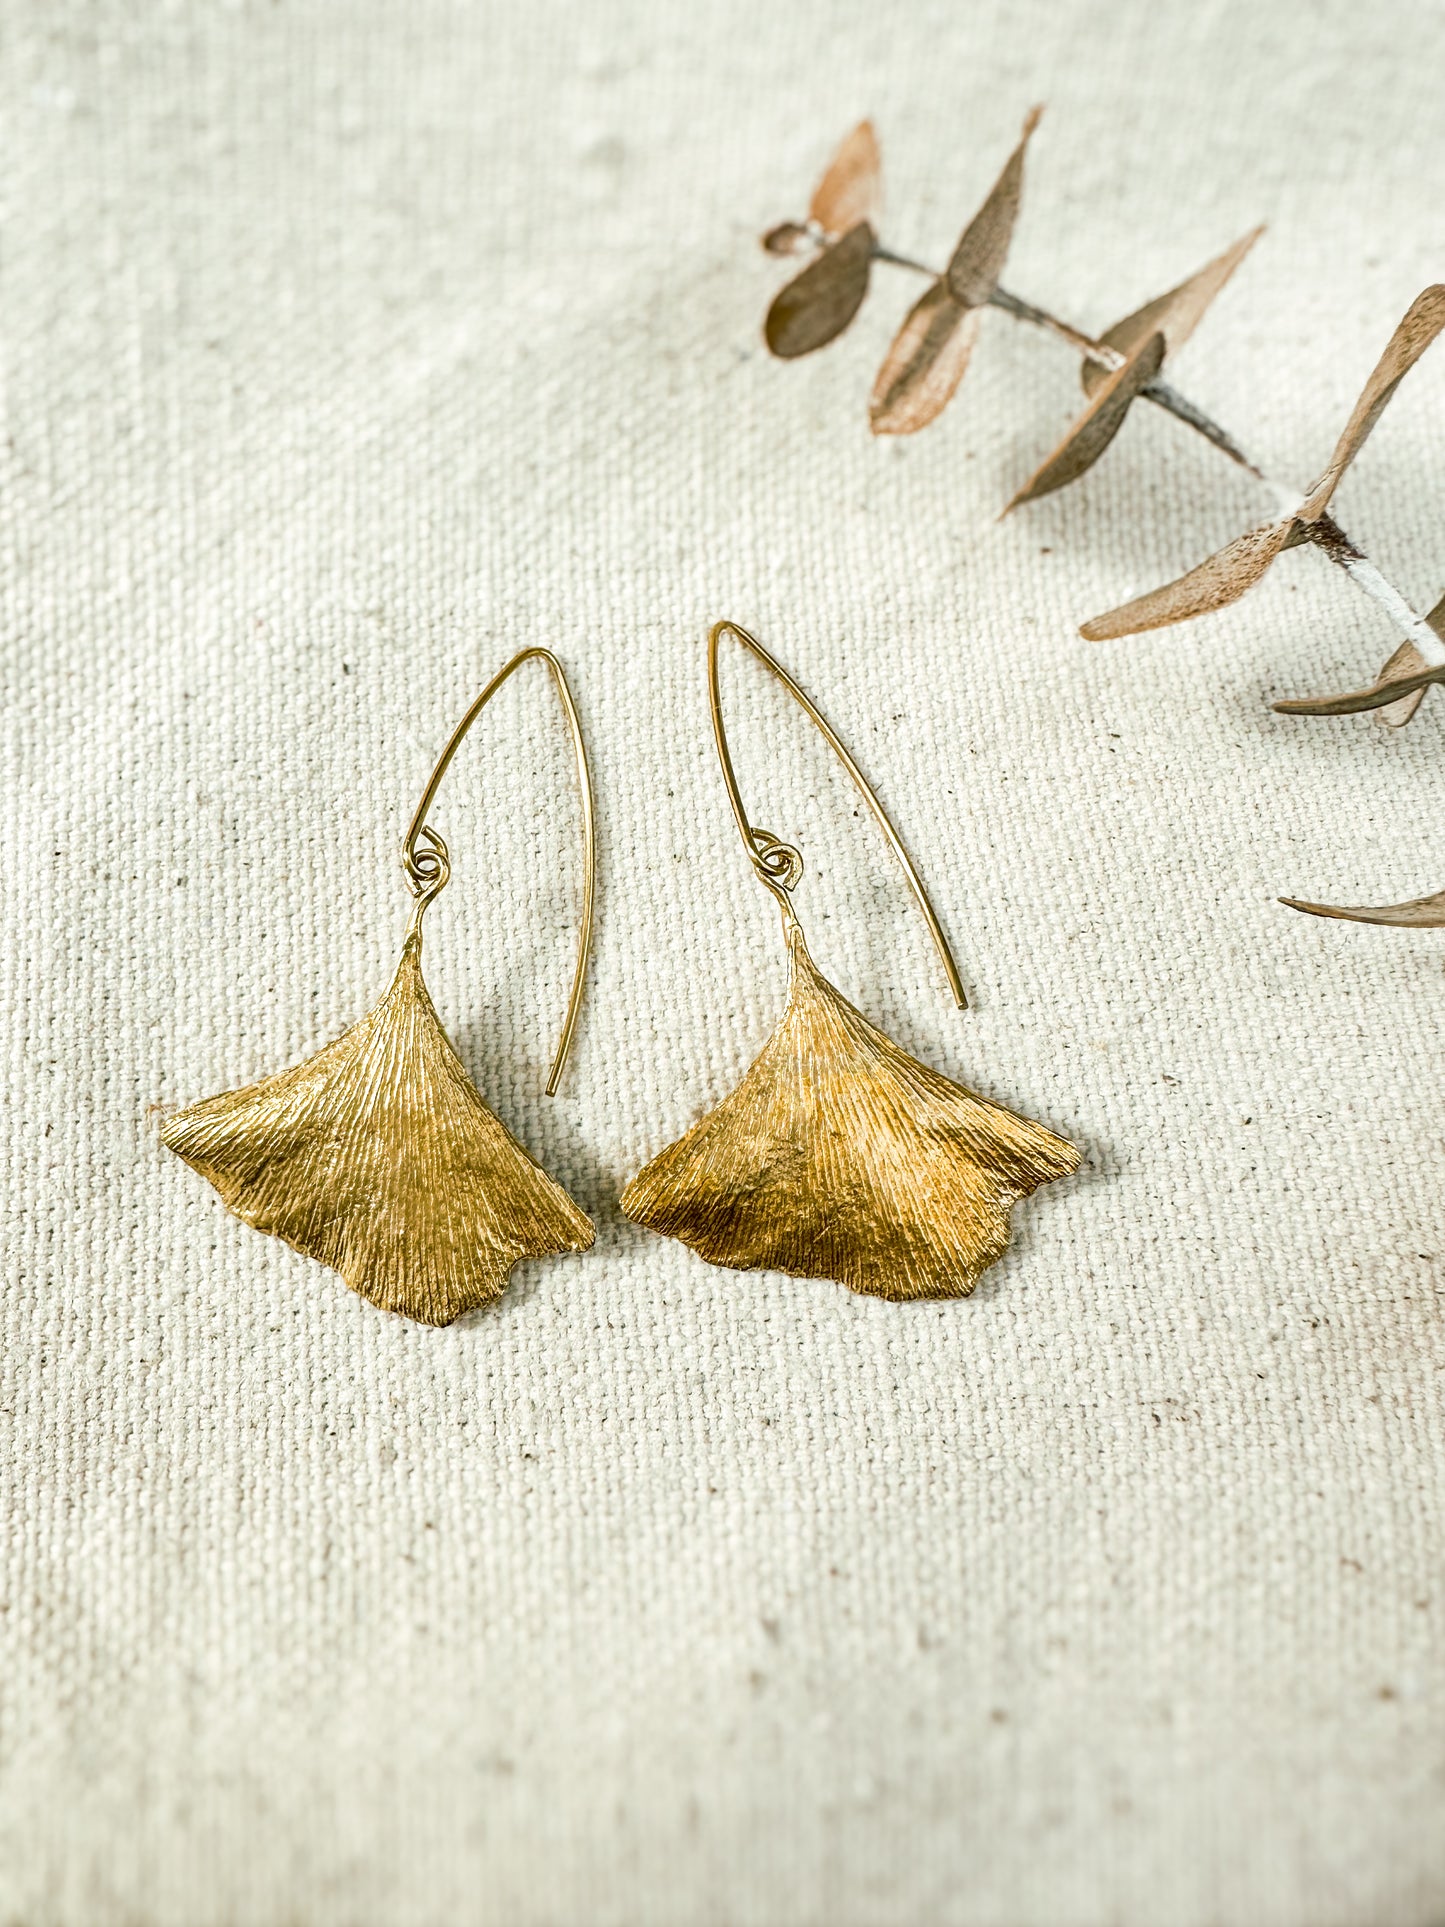 GINKGO | textured leaf earrings in Recycled Sterling Silver with Patina